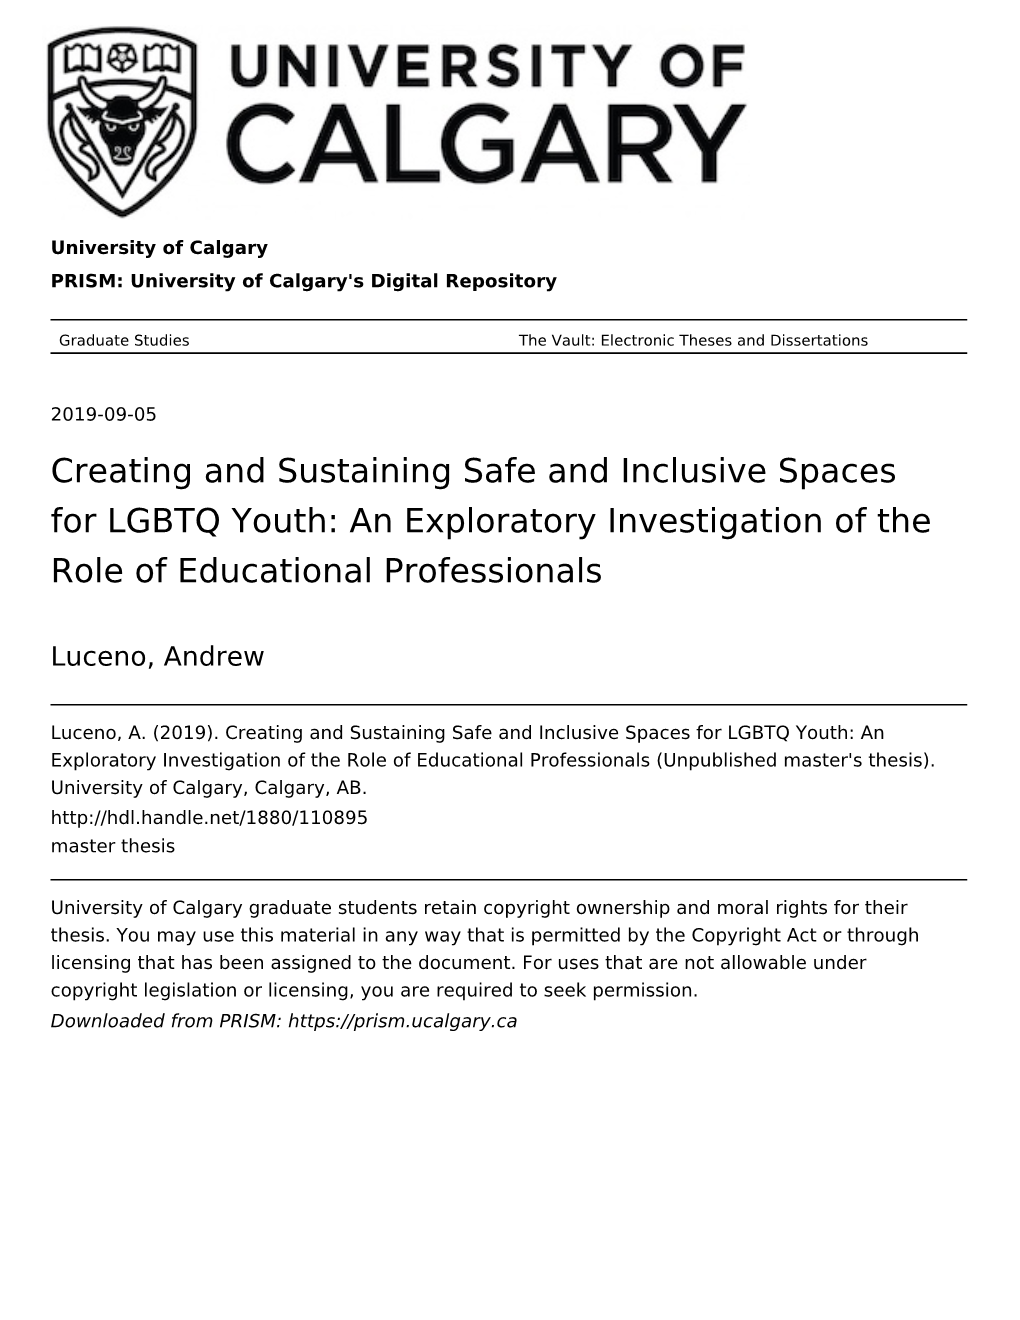 Creating and Sustaining Safe and Inclusive Spaces for LGBTQ Youth: an Exploratory Investigation of the Role of Educational Professionals